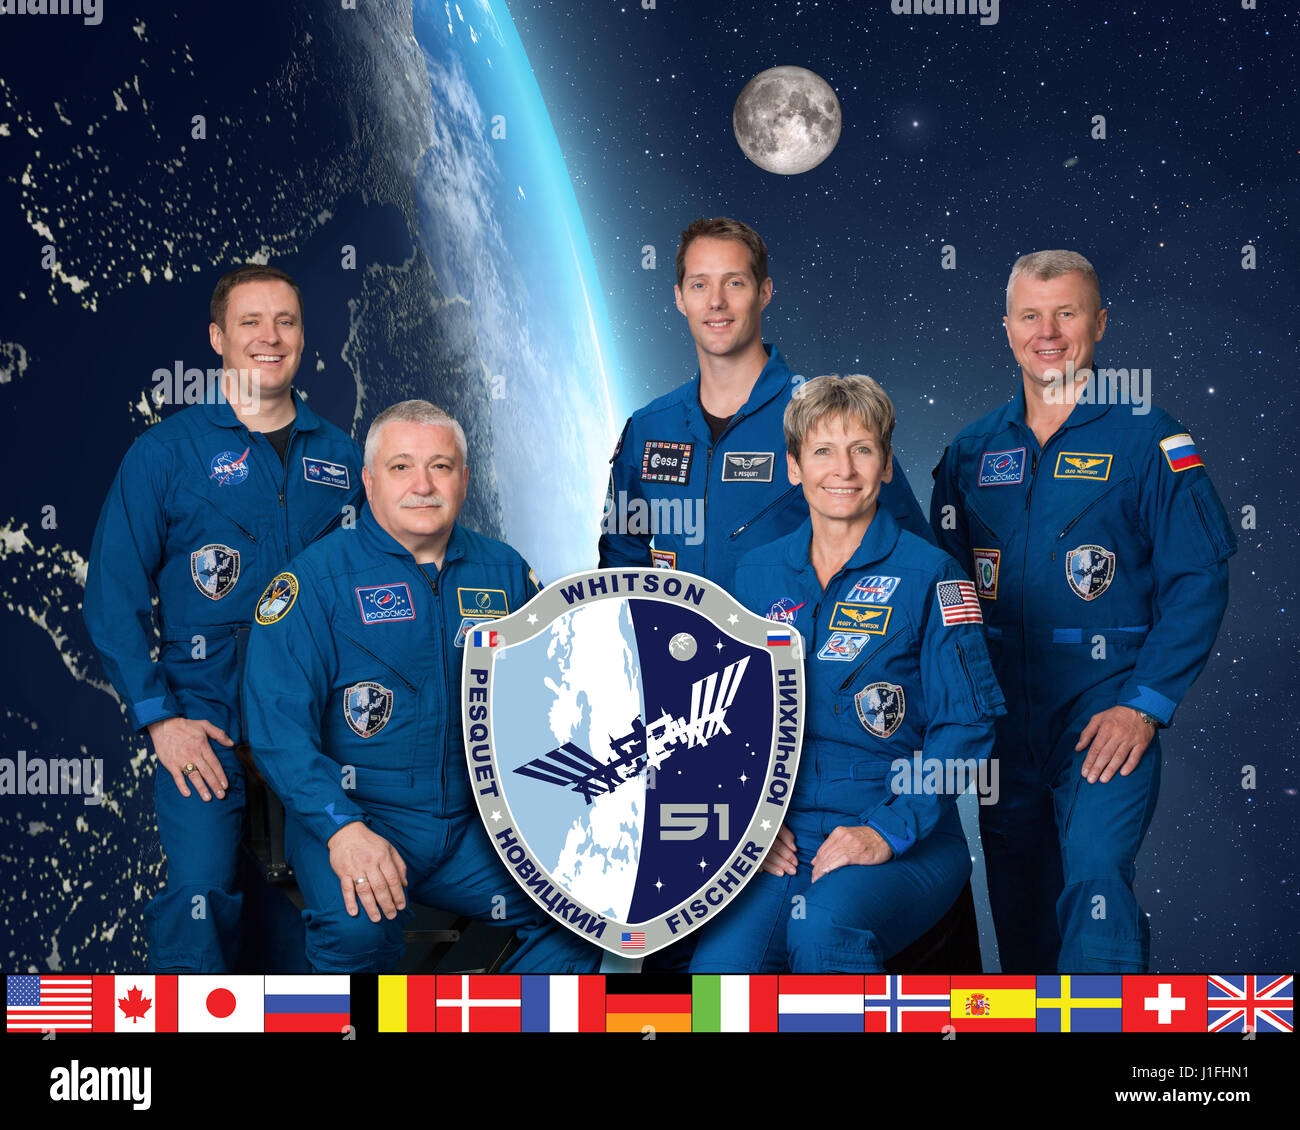 Official portrait of NASA International Space Station Expedition 51 Soyuz MS-04 mission prime crew members (L-R) American astronaut Jack Fischer, Russian cosmonaut Fyodor Yurchikhin of Roscosmos, French astronaut Thomas Pesquet of the European Space Agency, American astronaut Peggy Whitson, and Russian cosmonaut Oleg Novitskiy of Roscosmos at the Johnson Space Center February 7, 2017 in Houston, Texas.      (photo by NASA Photo/NASA   via Planetpix) Stock Photo